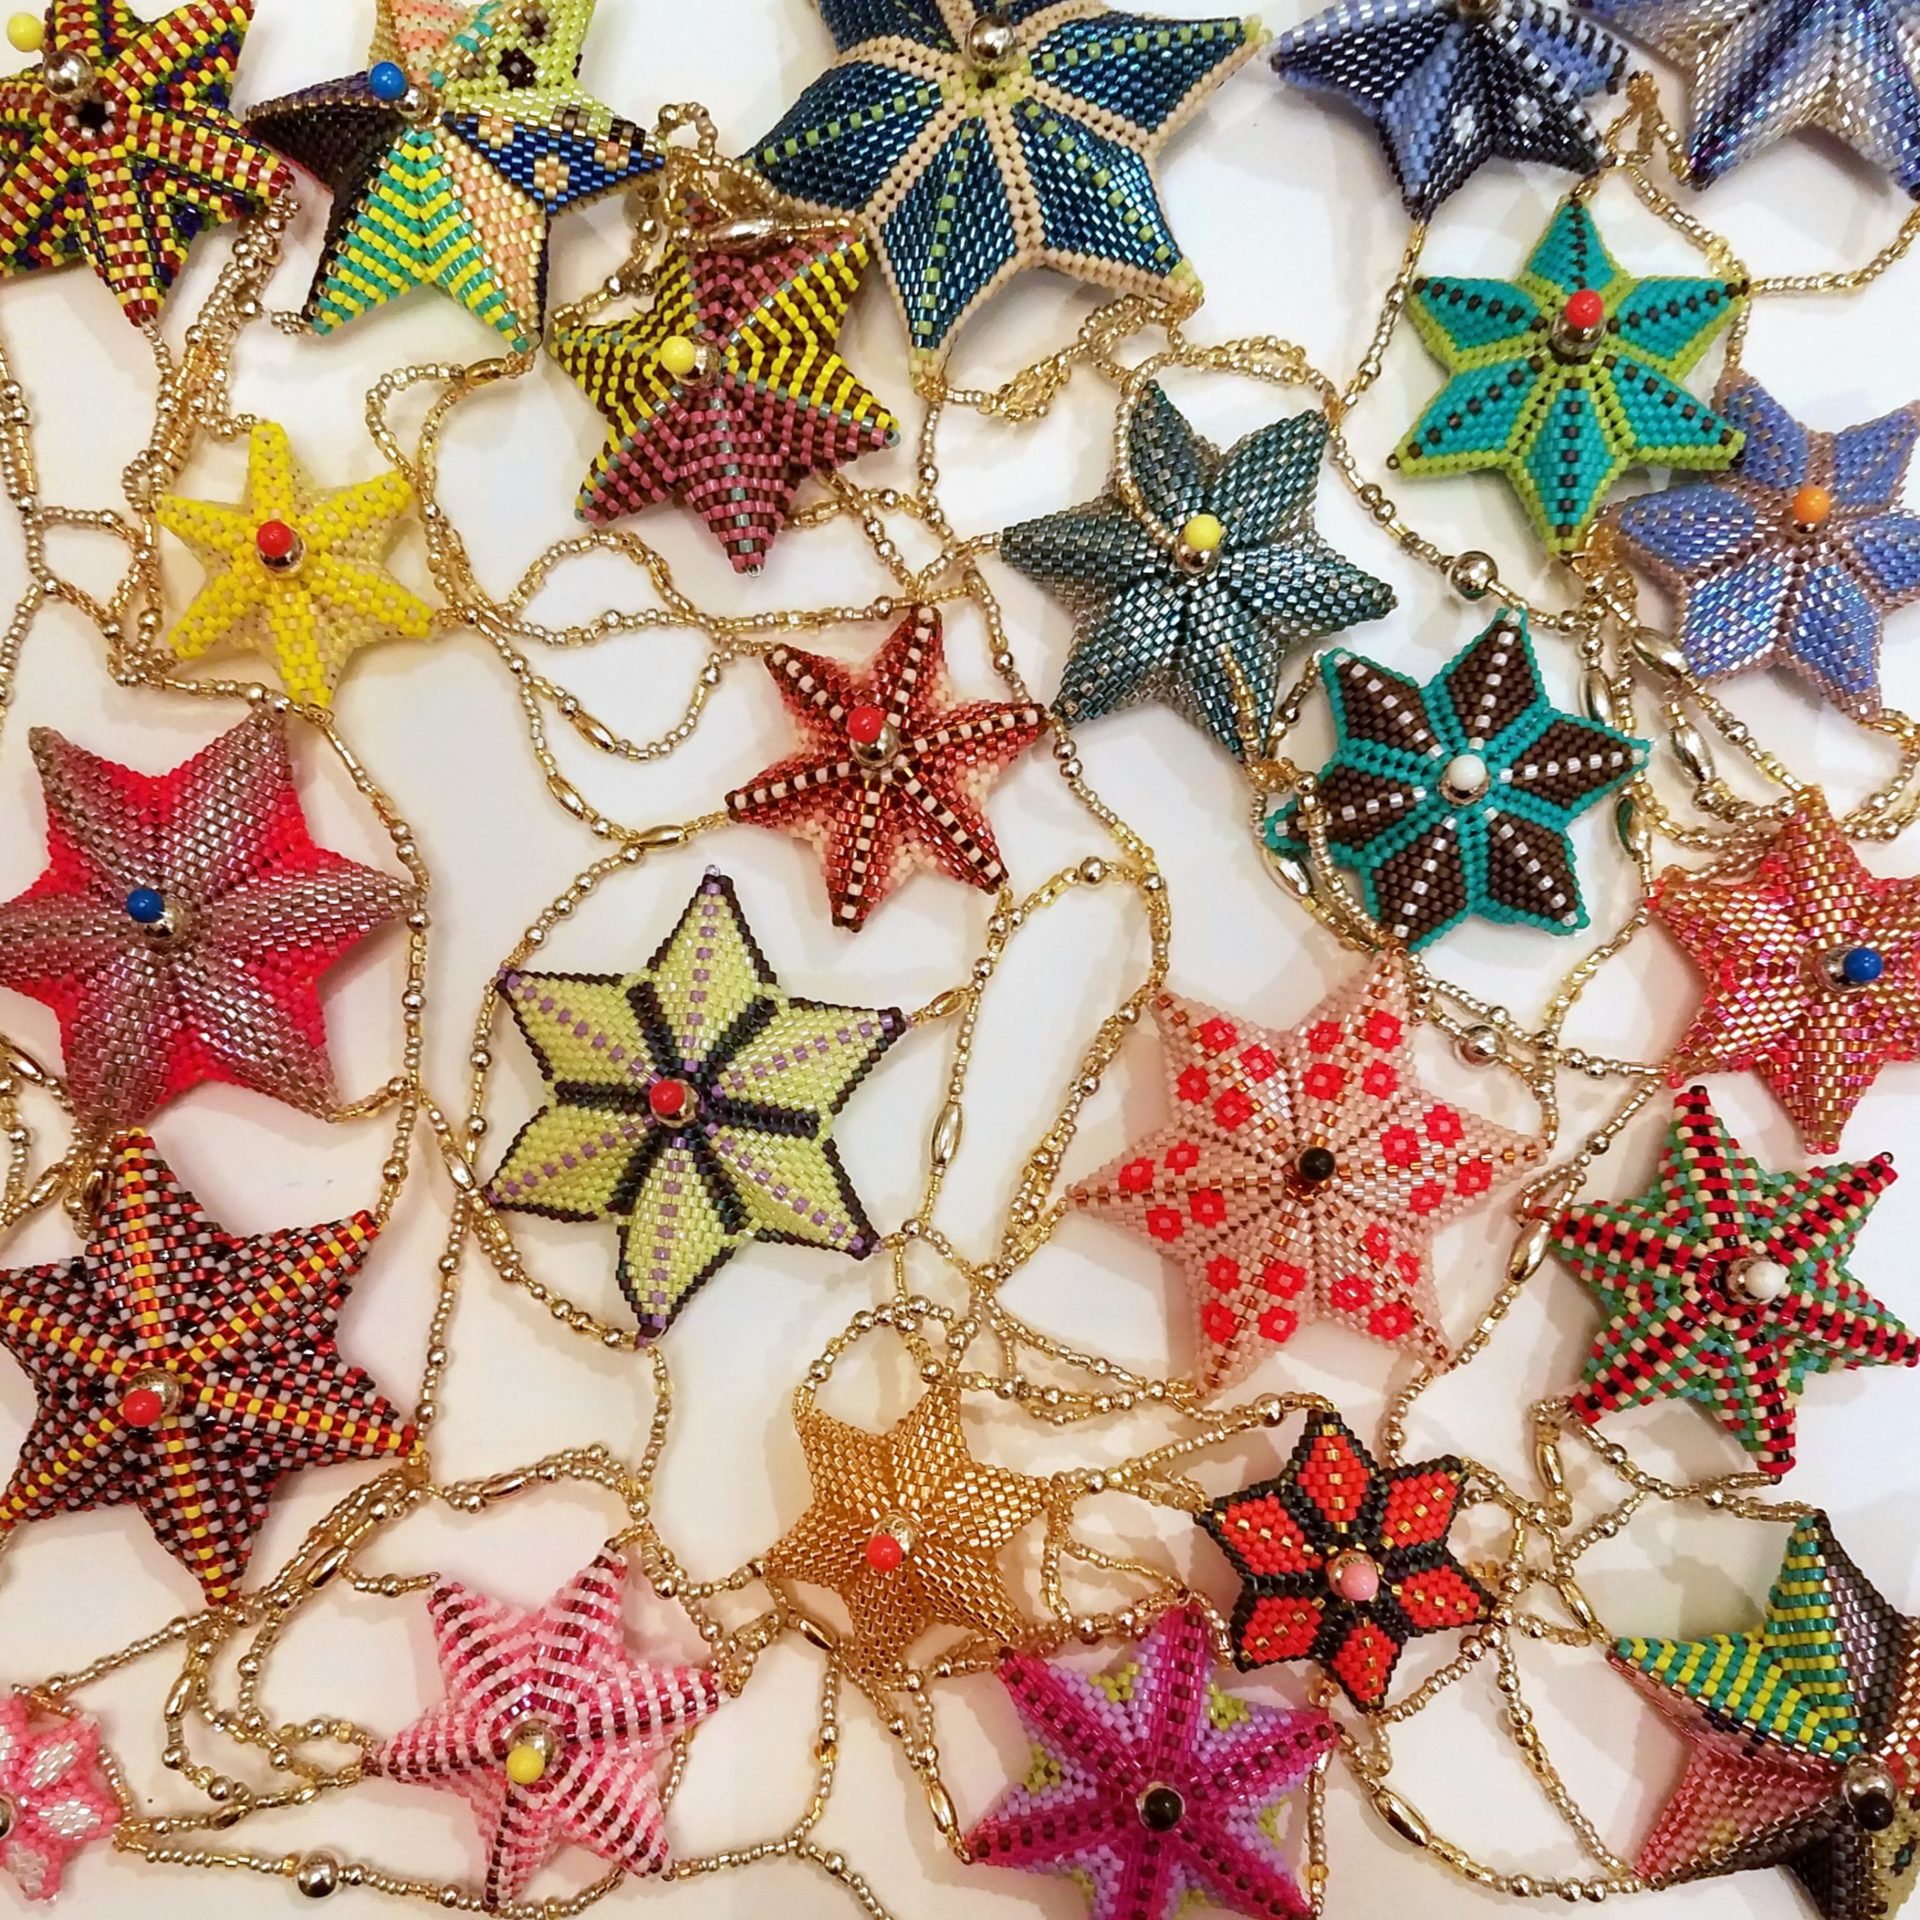 New date for our exciting Contemporary Geometric Beadwork ESP with Sam Norgard